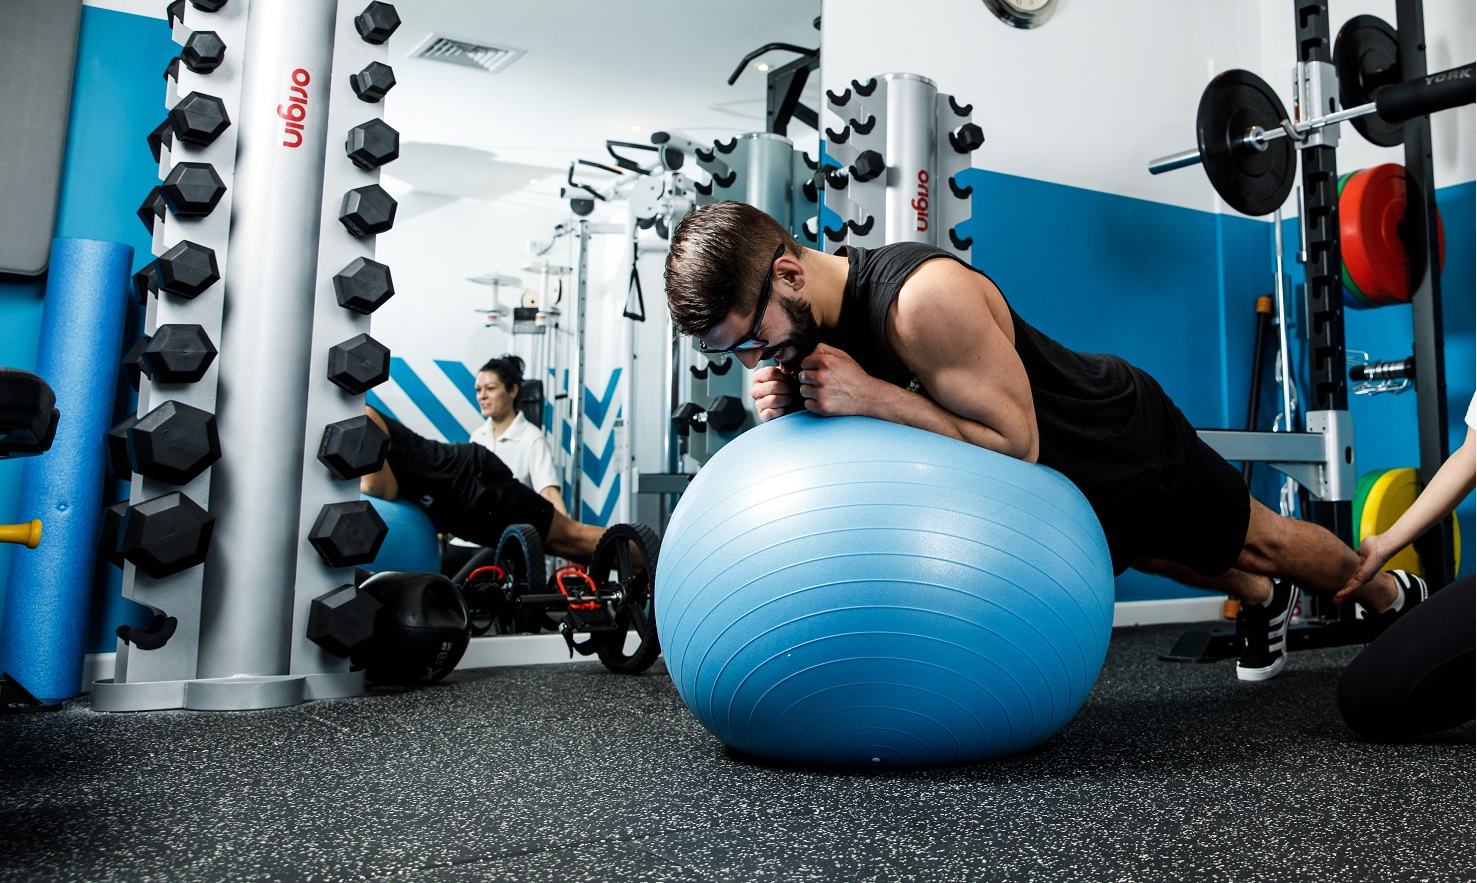 You’ll be on a roll at our Fit Body Ball class